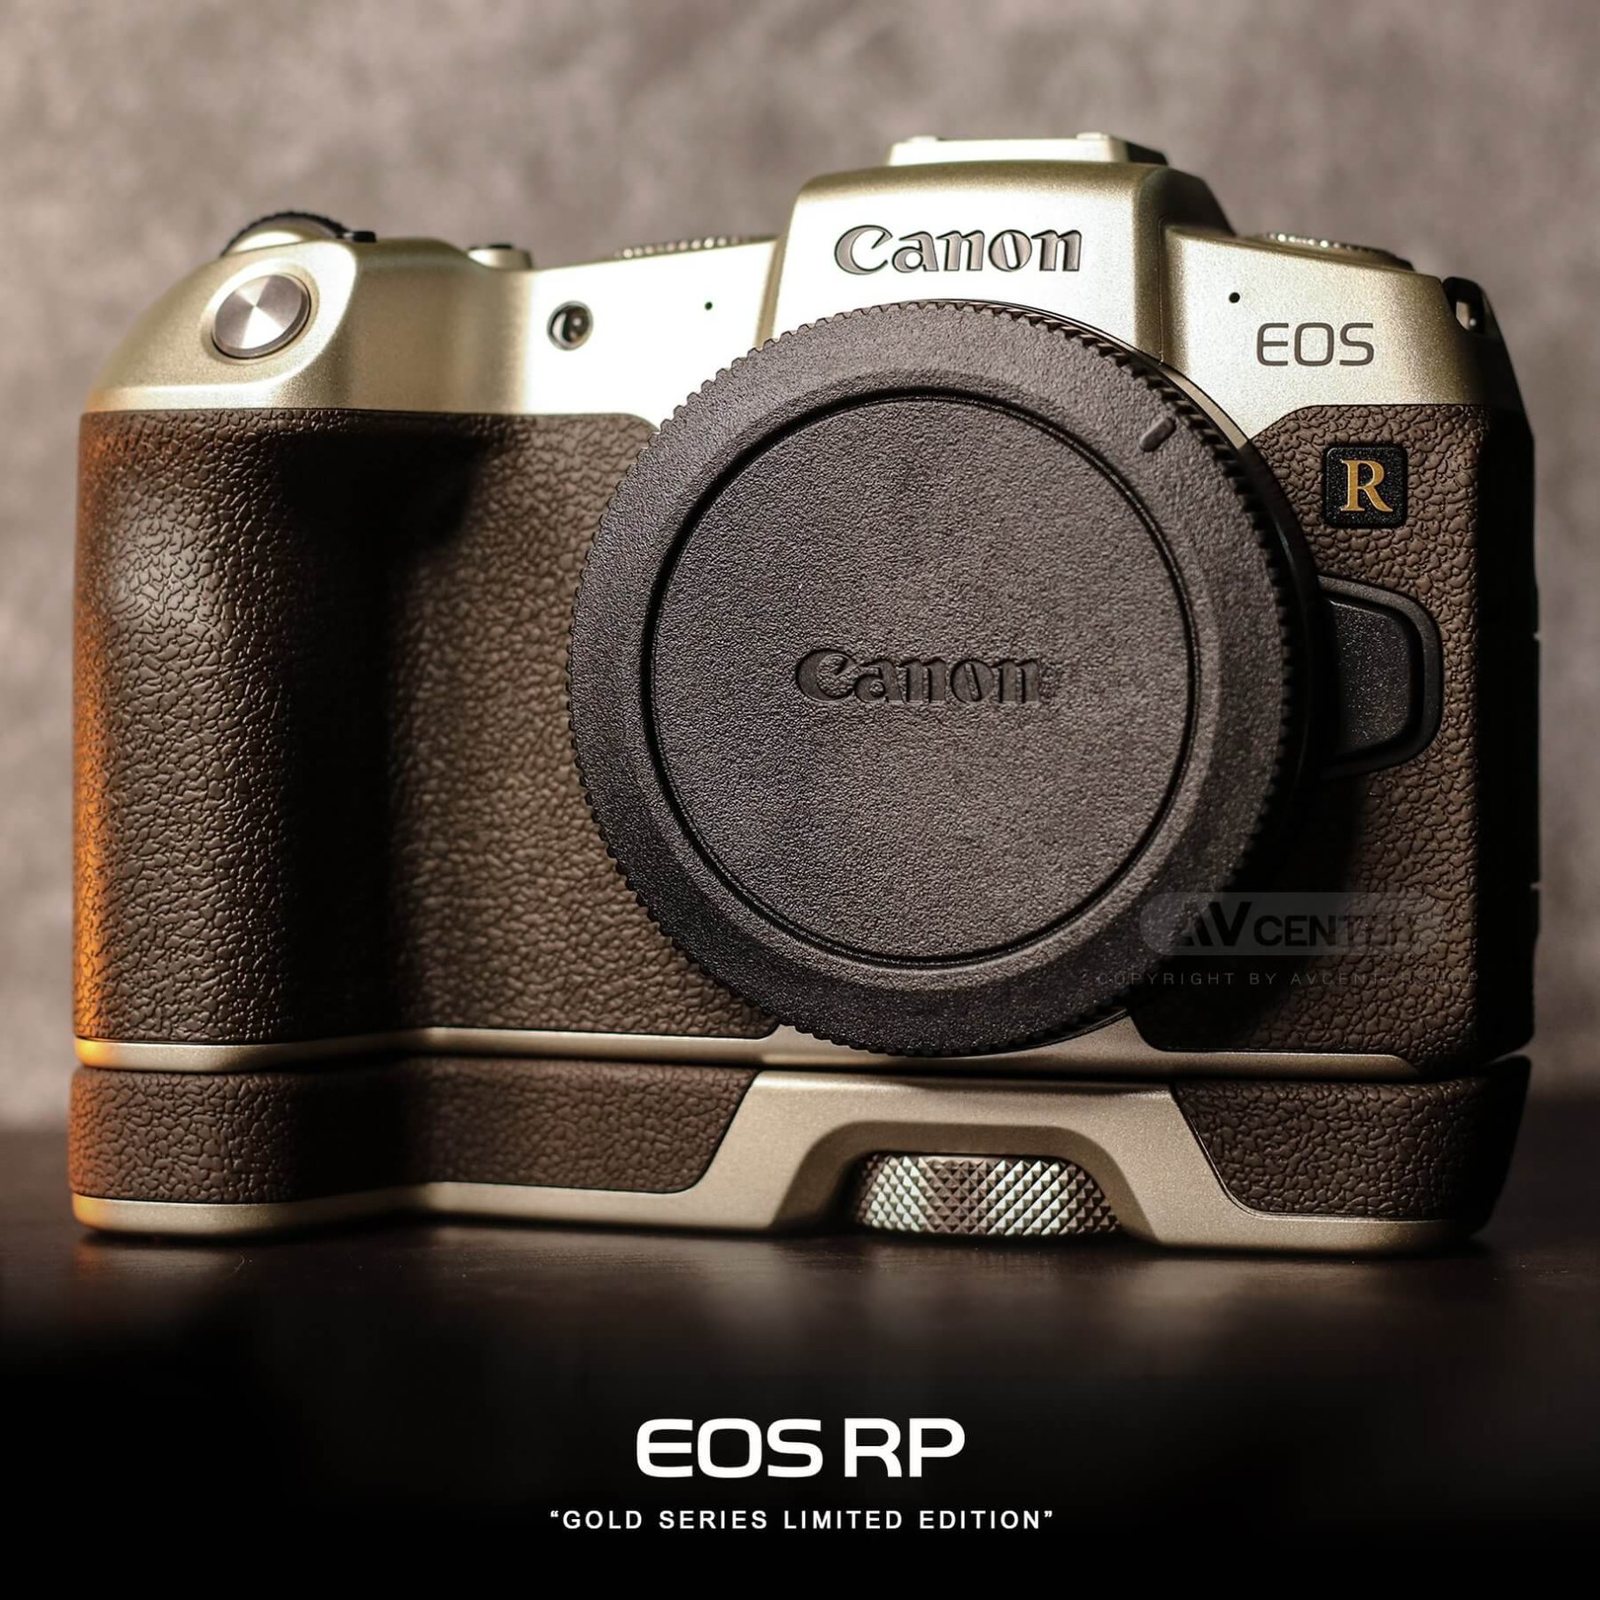 Canon-Mirrorless-Camera-EOS-RP-Body-Gold-Series-Limited-Edition-2.jpg